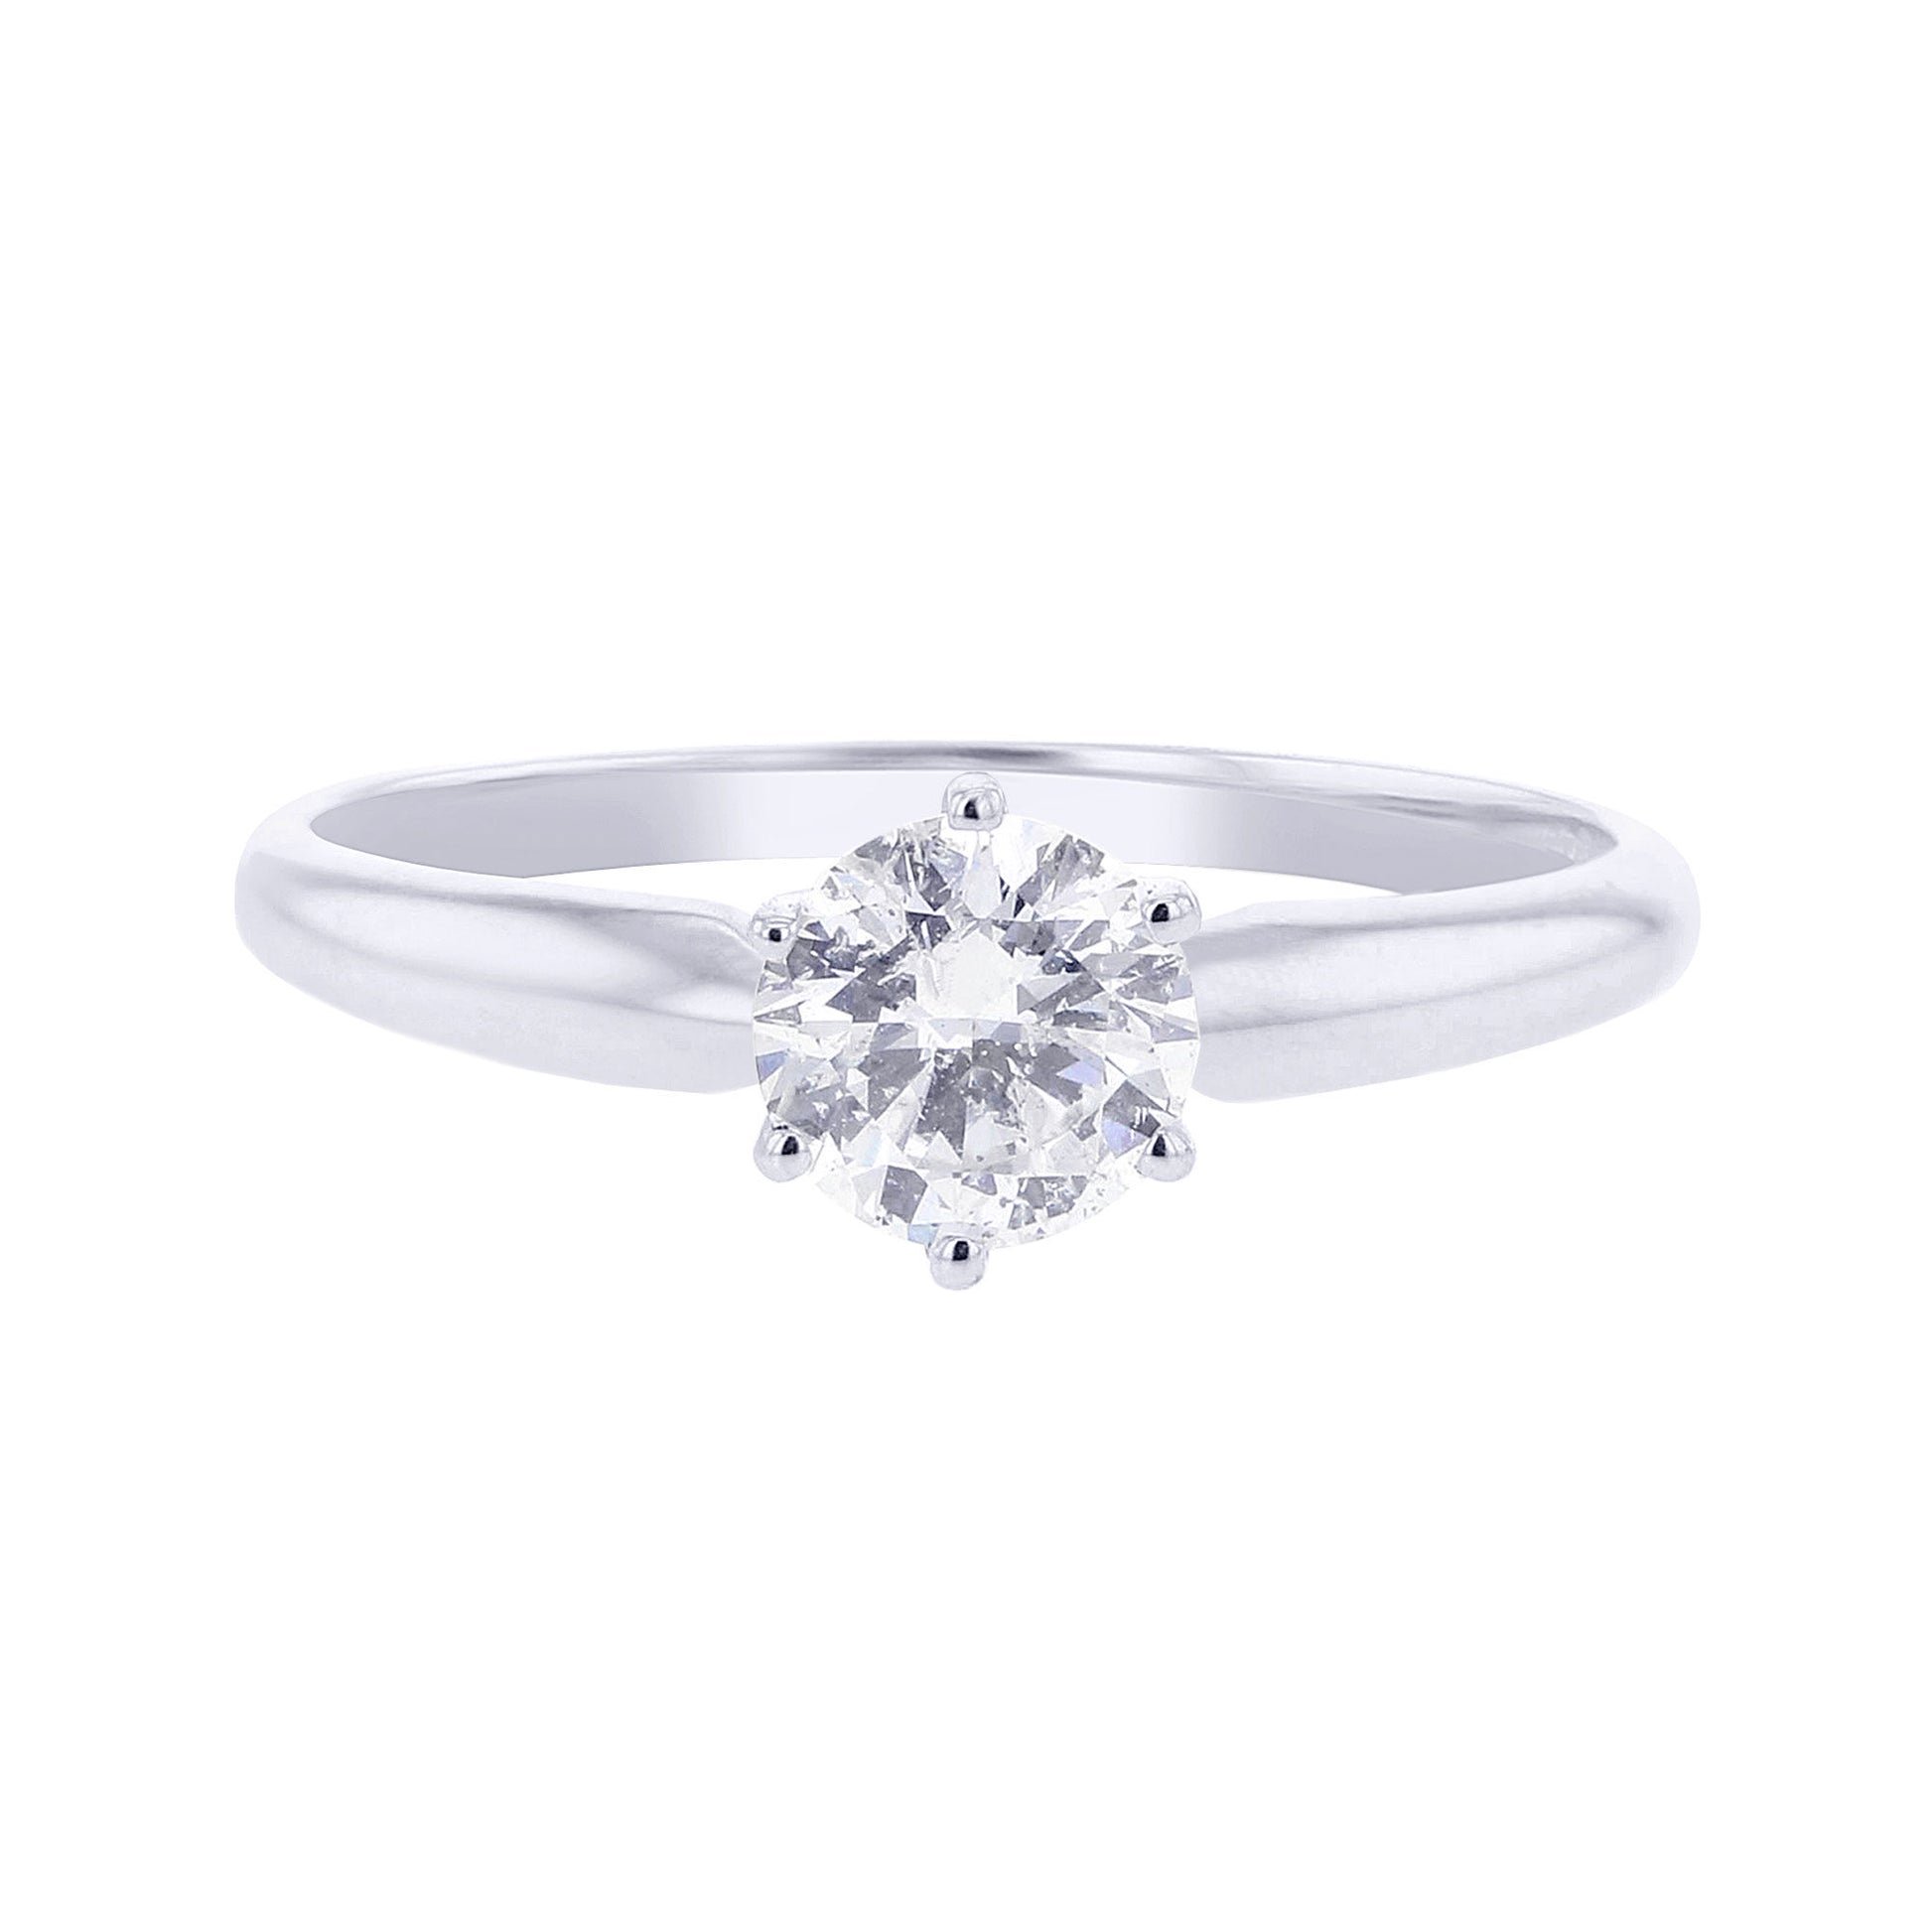 Christa Ready for Love Diamond Engagement Ring 1/2CT